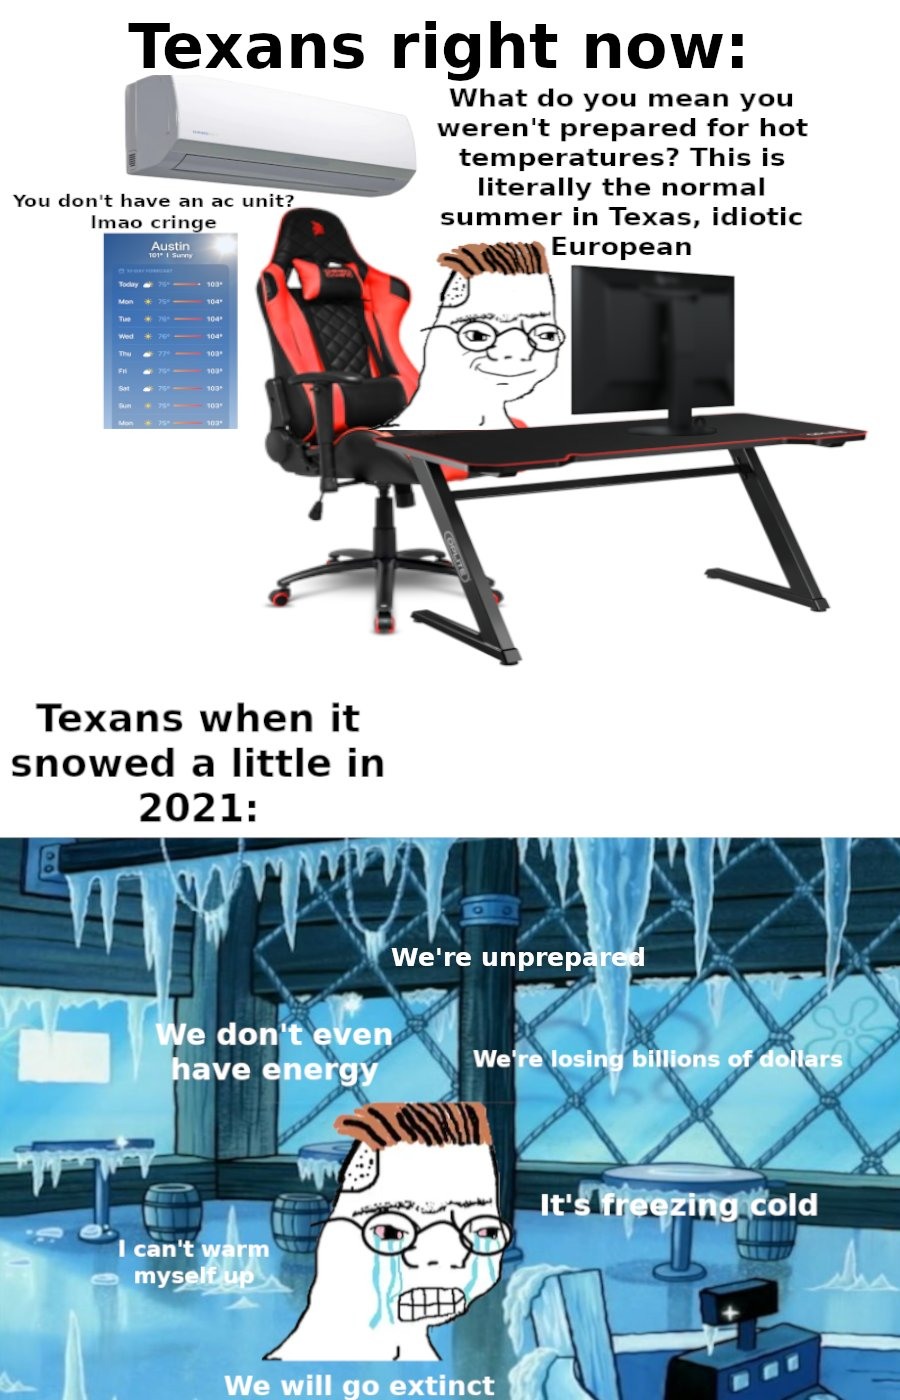 dank memes - funny memes - cartoon - Texans right now What do you mean you weren't prepared for hot temperatures? This is t literally the normal summer in Texas, idiotic European You don't have an ac unit? Imao cringe Texans when it snowed a little in 202